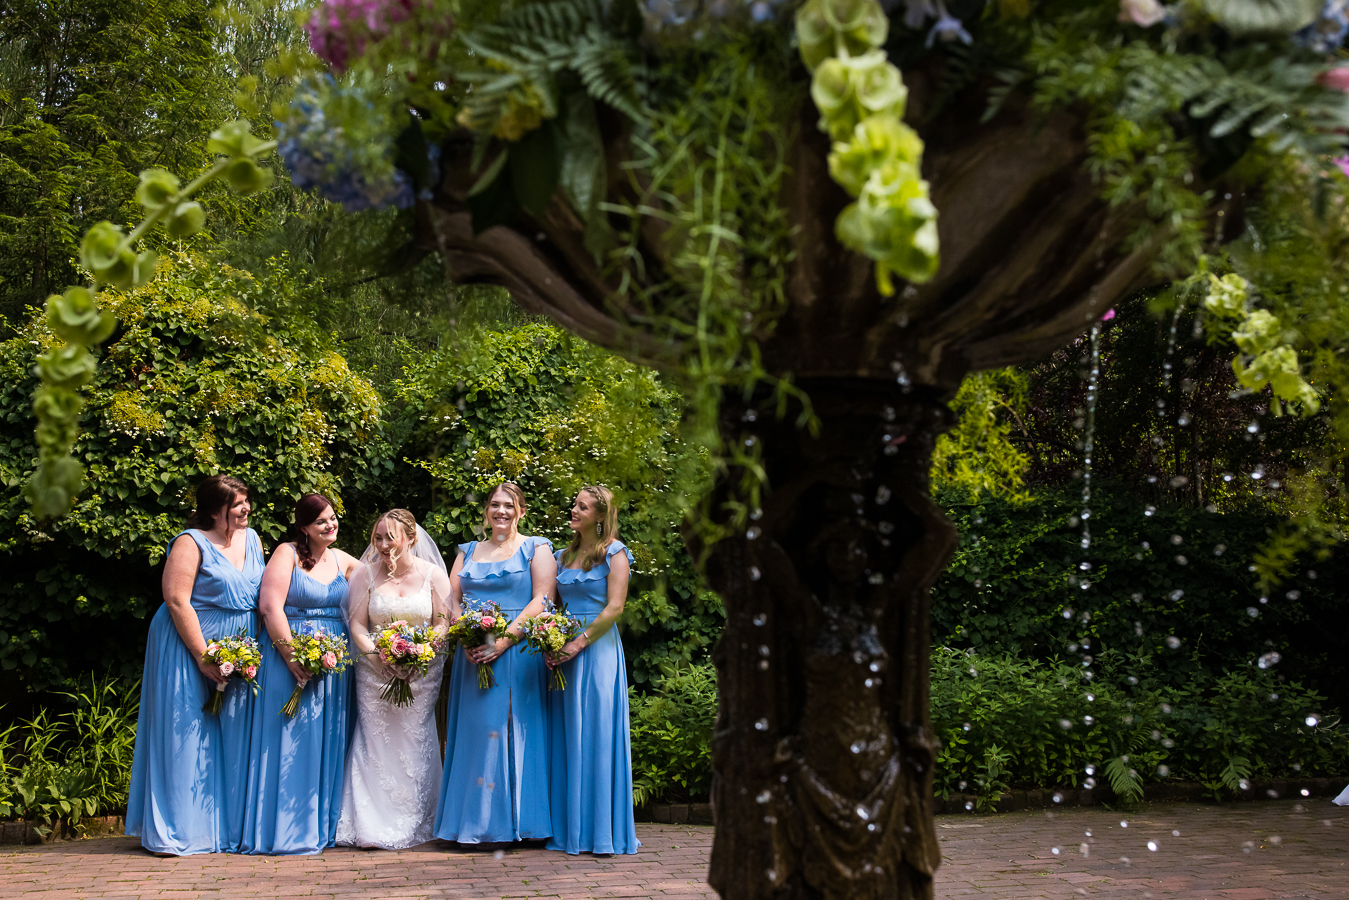 candid photographer, lisa rhinehart, captures this image of the bride and her bridesmaids laughing and smiling at each other captured through the dripping outdoor water fountain 